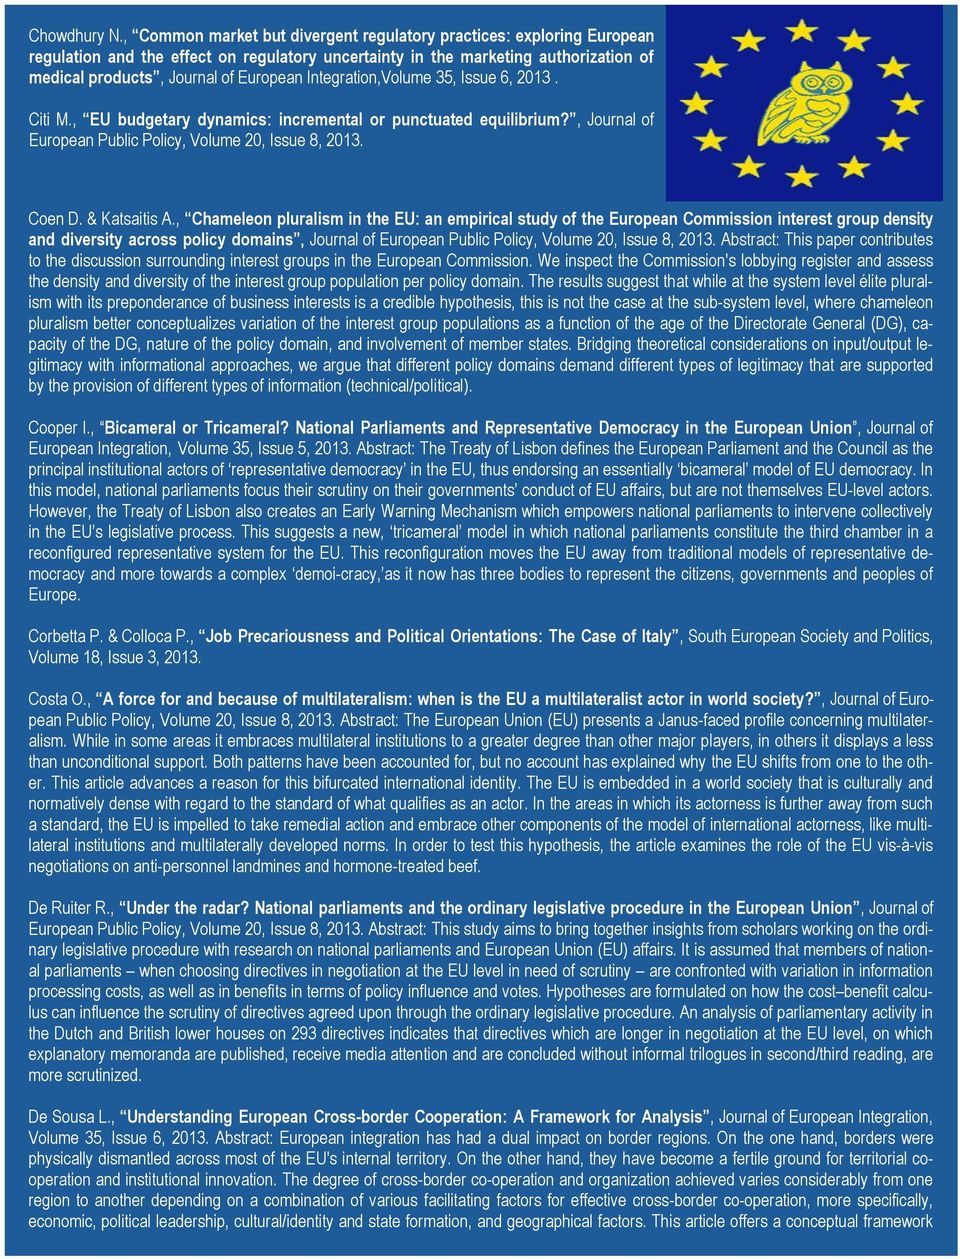 Integration,Volume 35, Issue 6, 2013. Citi M., EU budgetary dynamics: incremental or punctuated equilibrium?, Journal of European Public Policy, Volume 20, Issue 8, 2013. Coen D. & Katsaitis A.